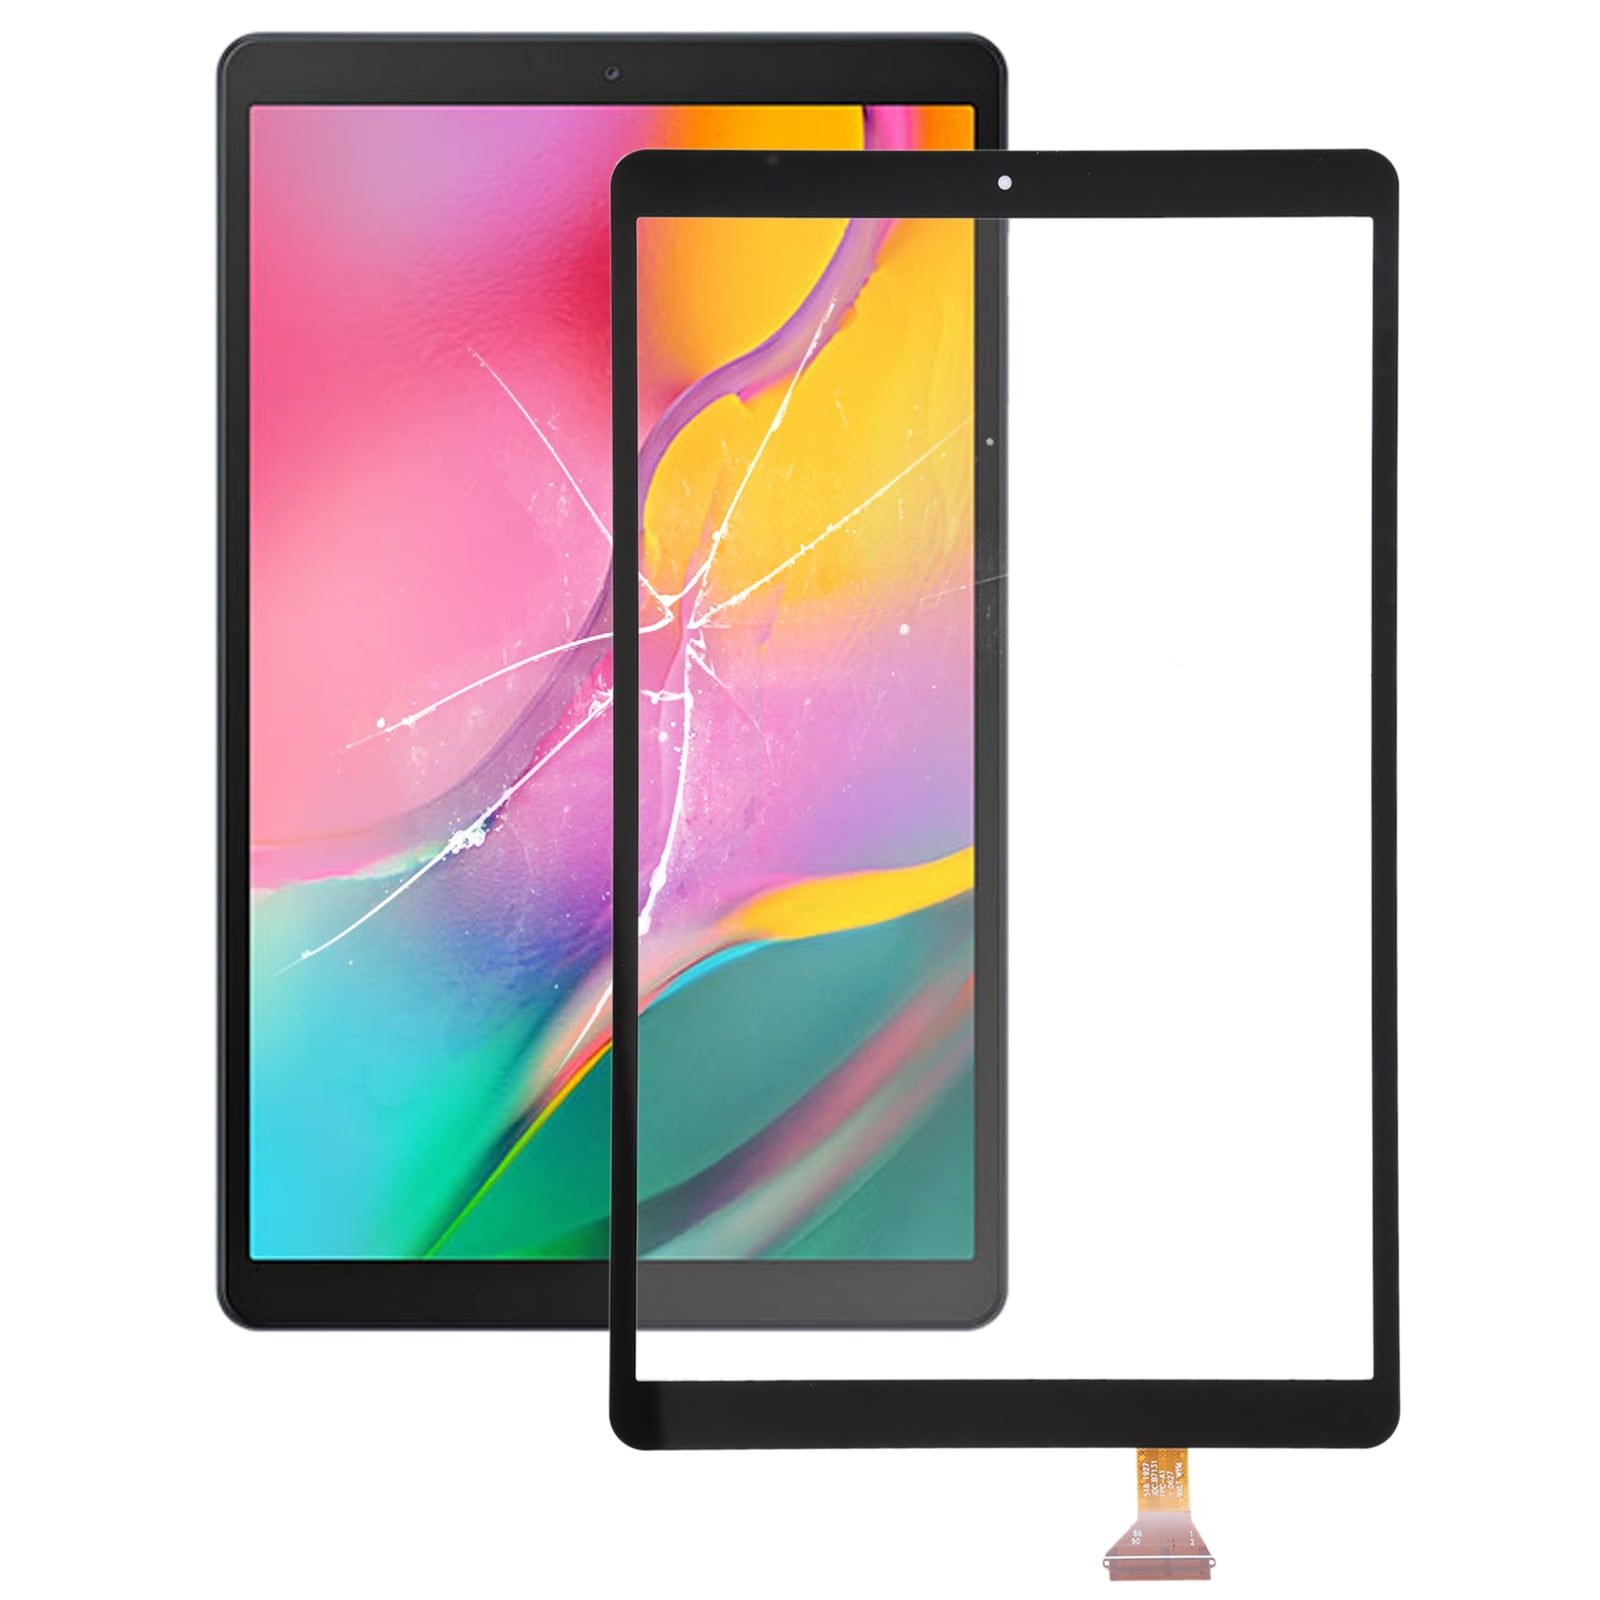 LCD Display Touch Screen For Samsung Galaxy Tab A 10.1 2019 SM-T510 SM-T515